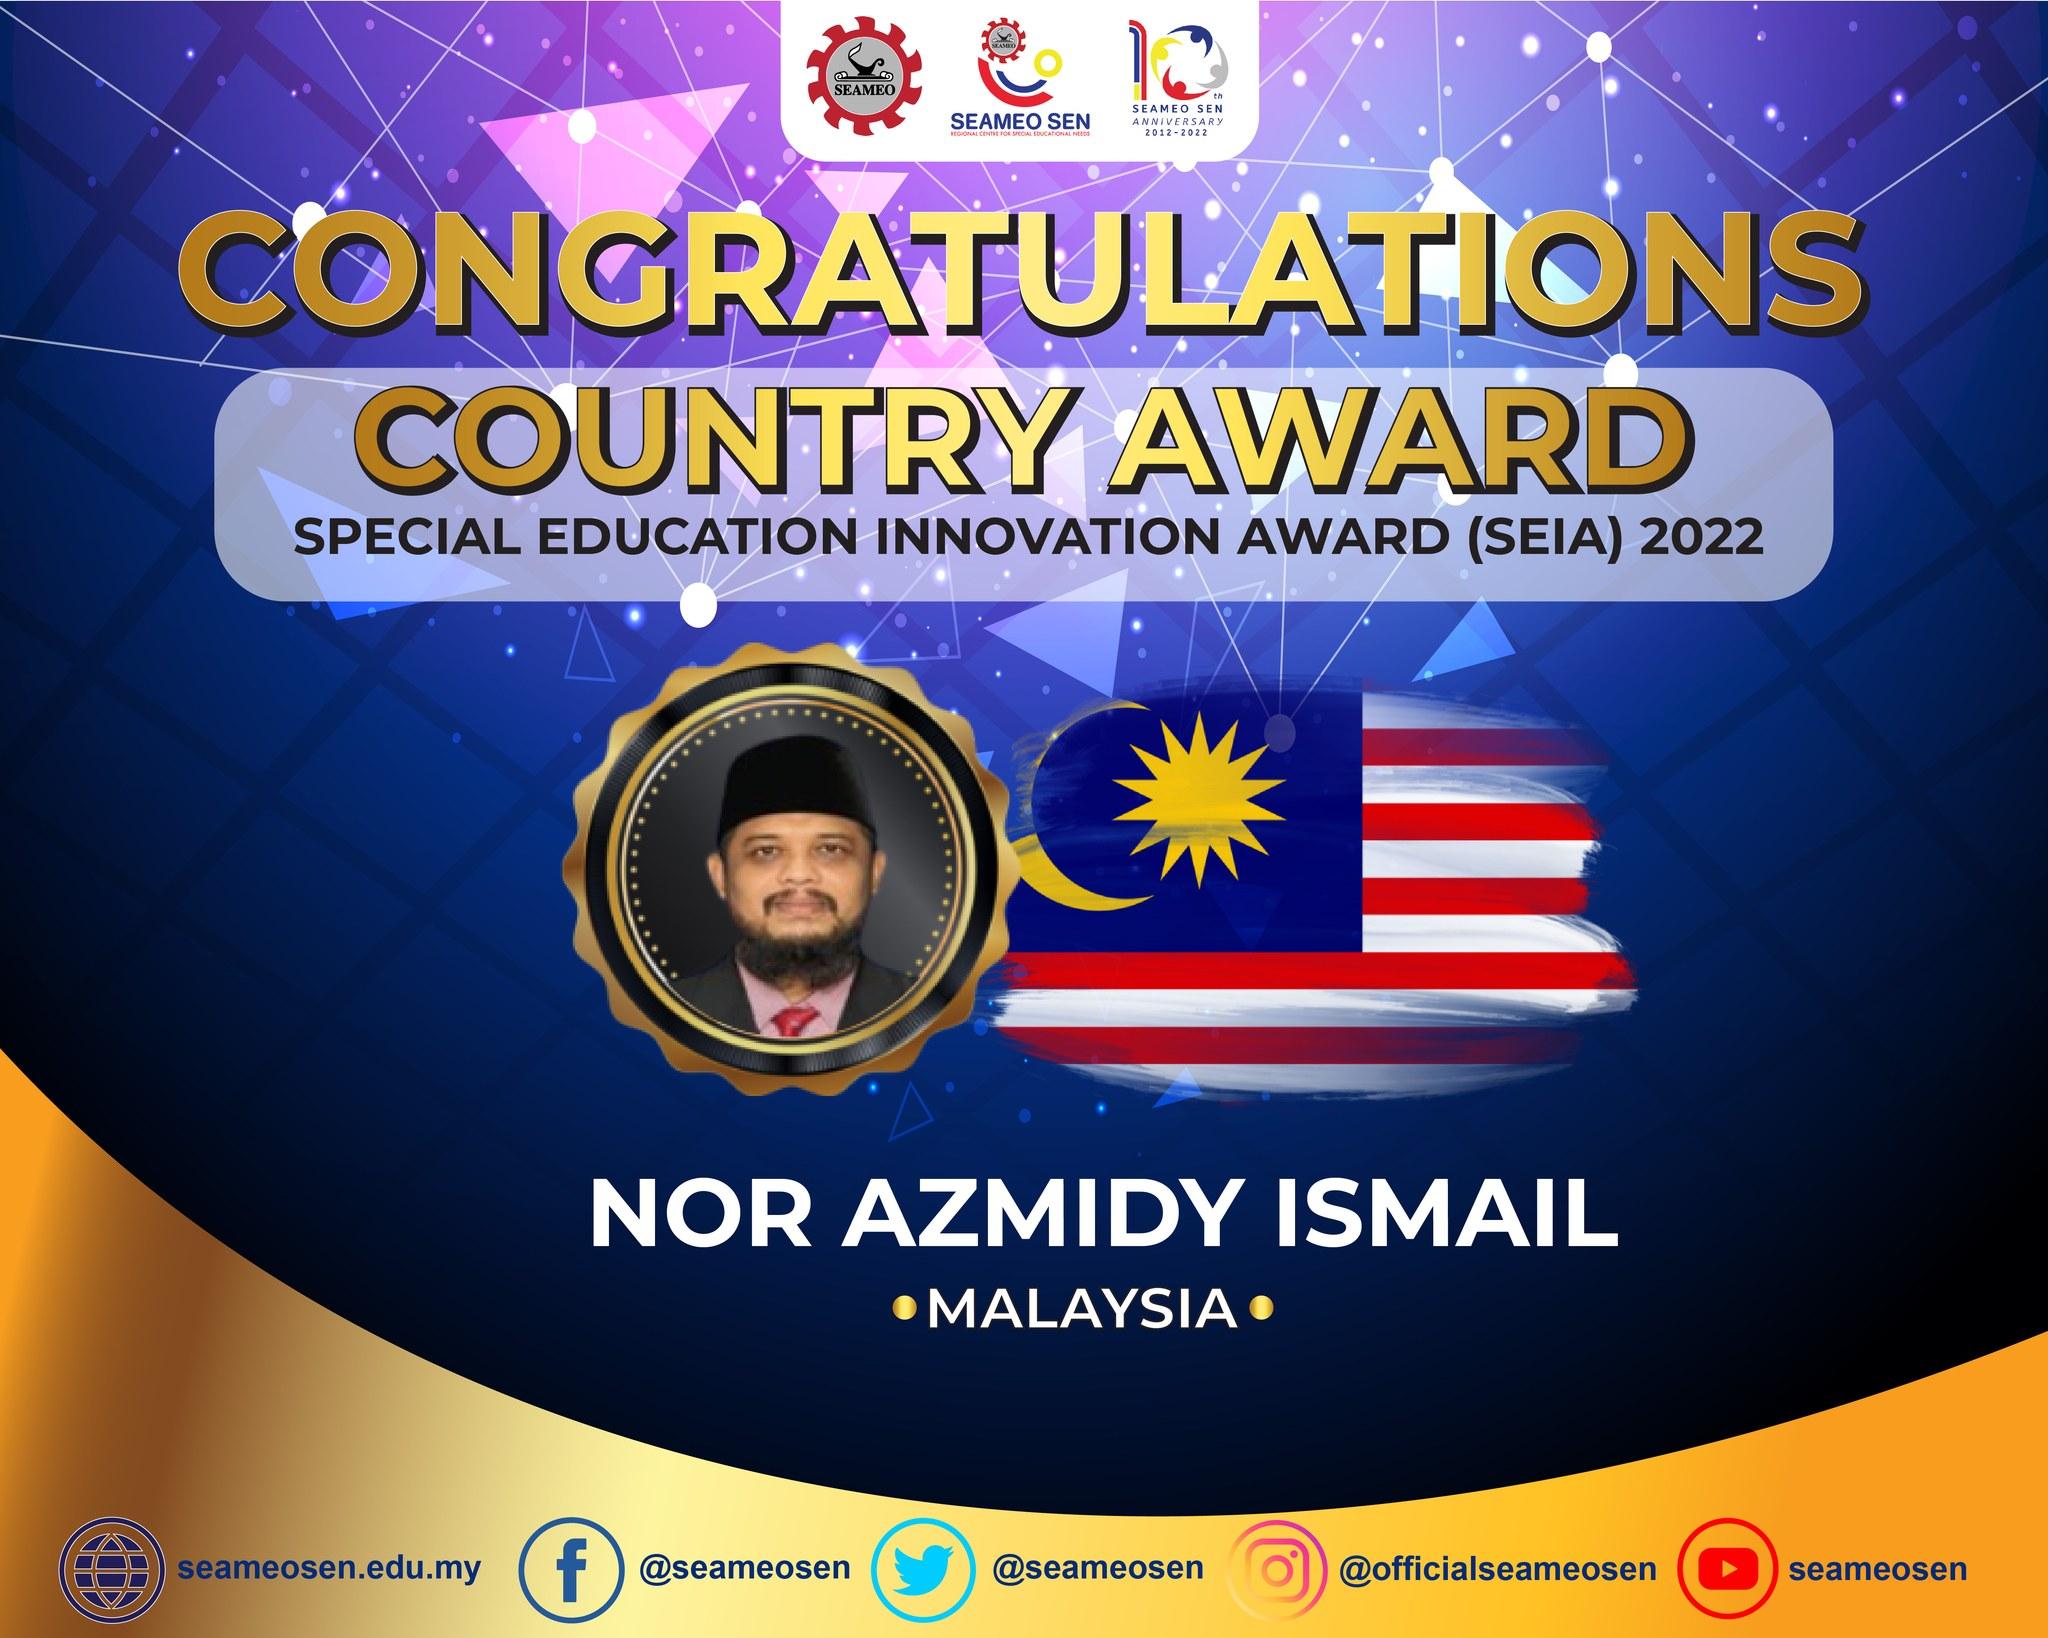 Country Award for Malaysia is Mr. Nor Azmidy Ismail